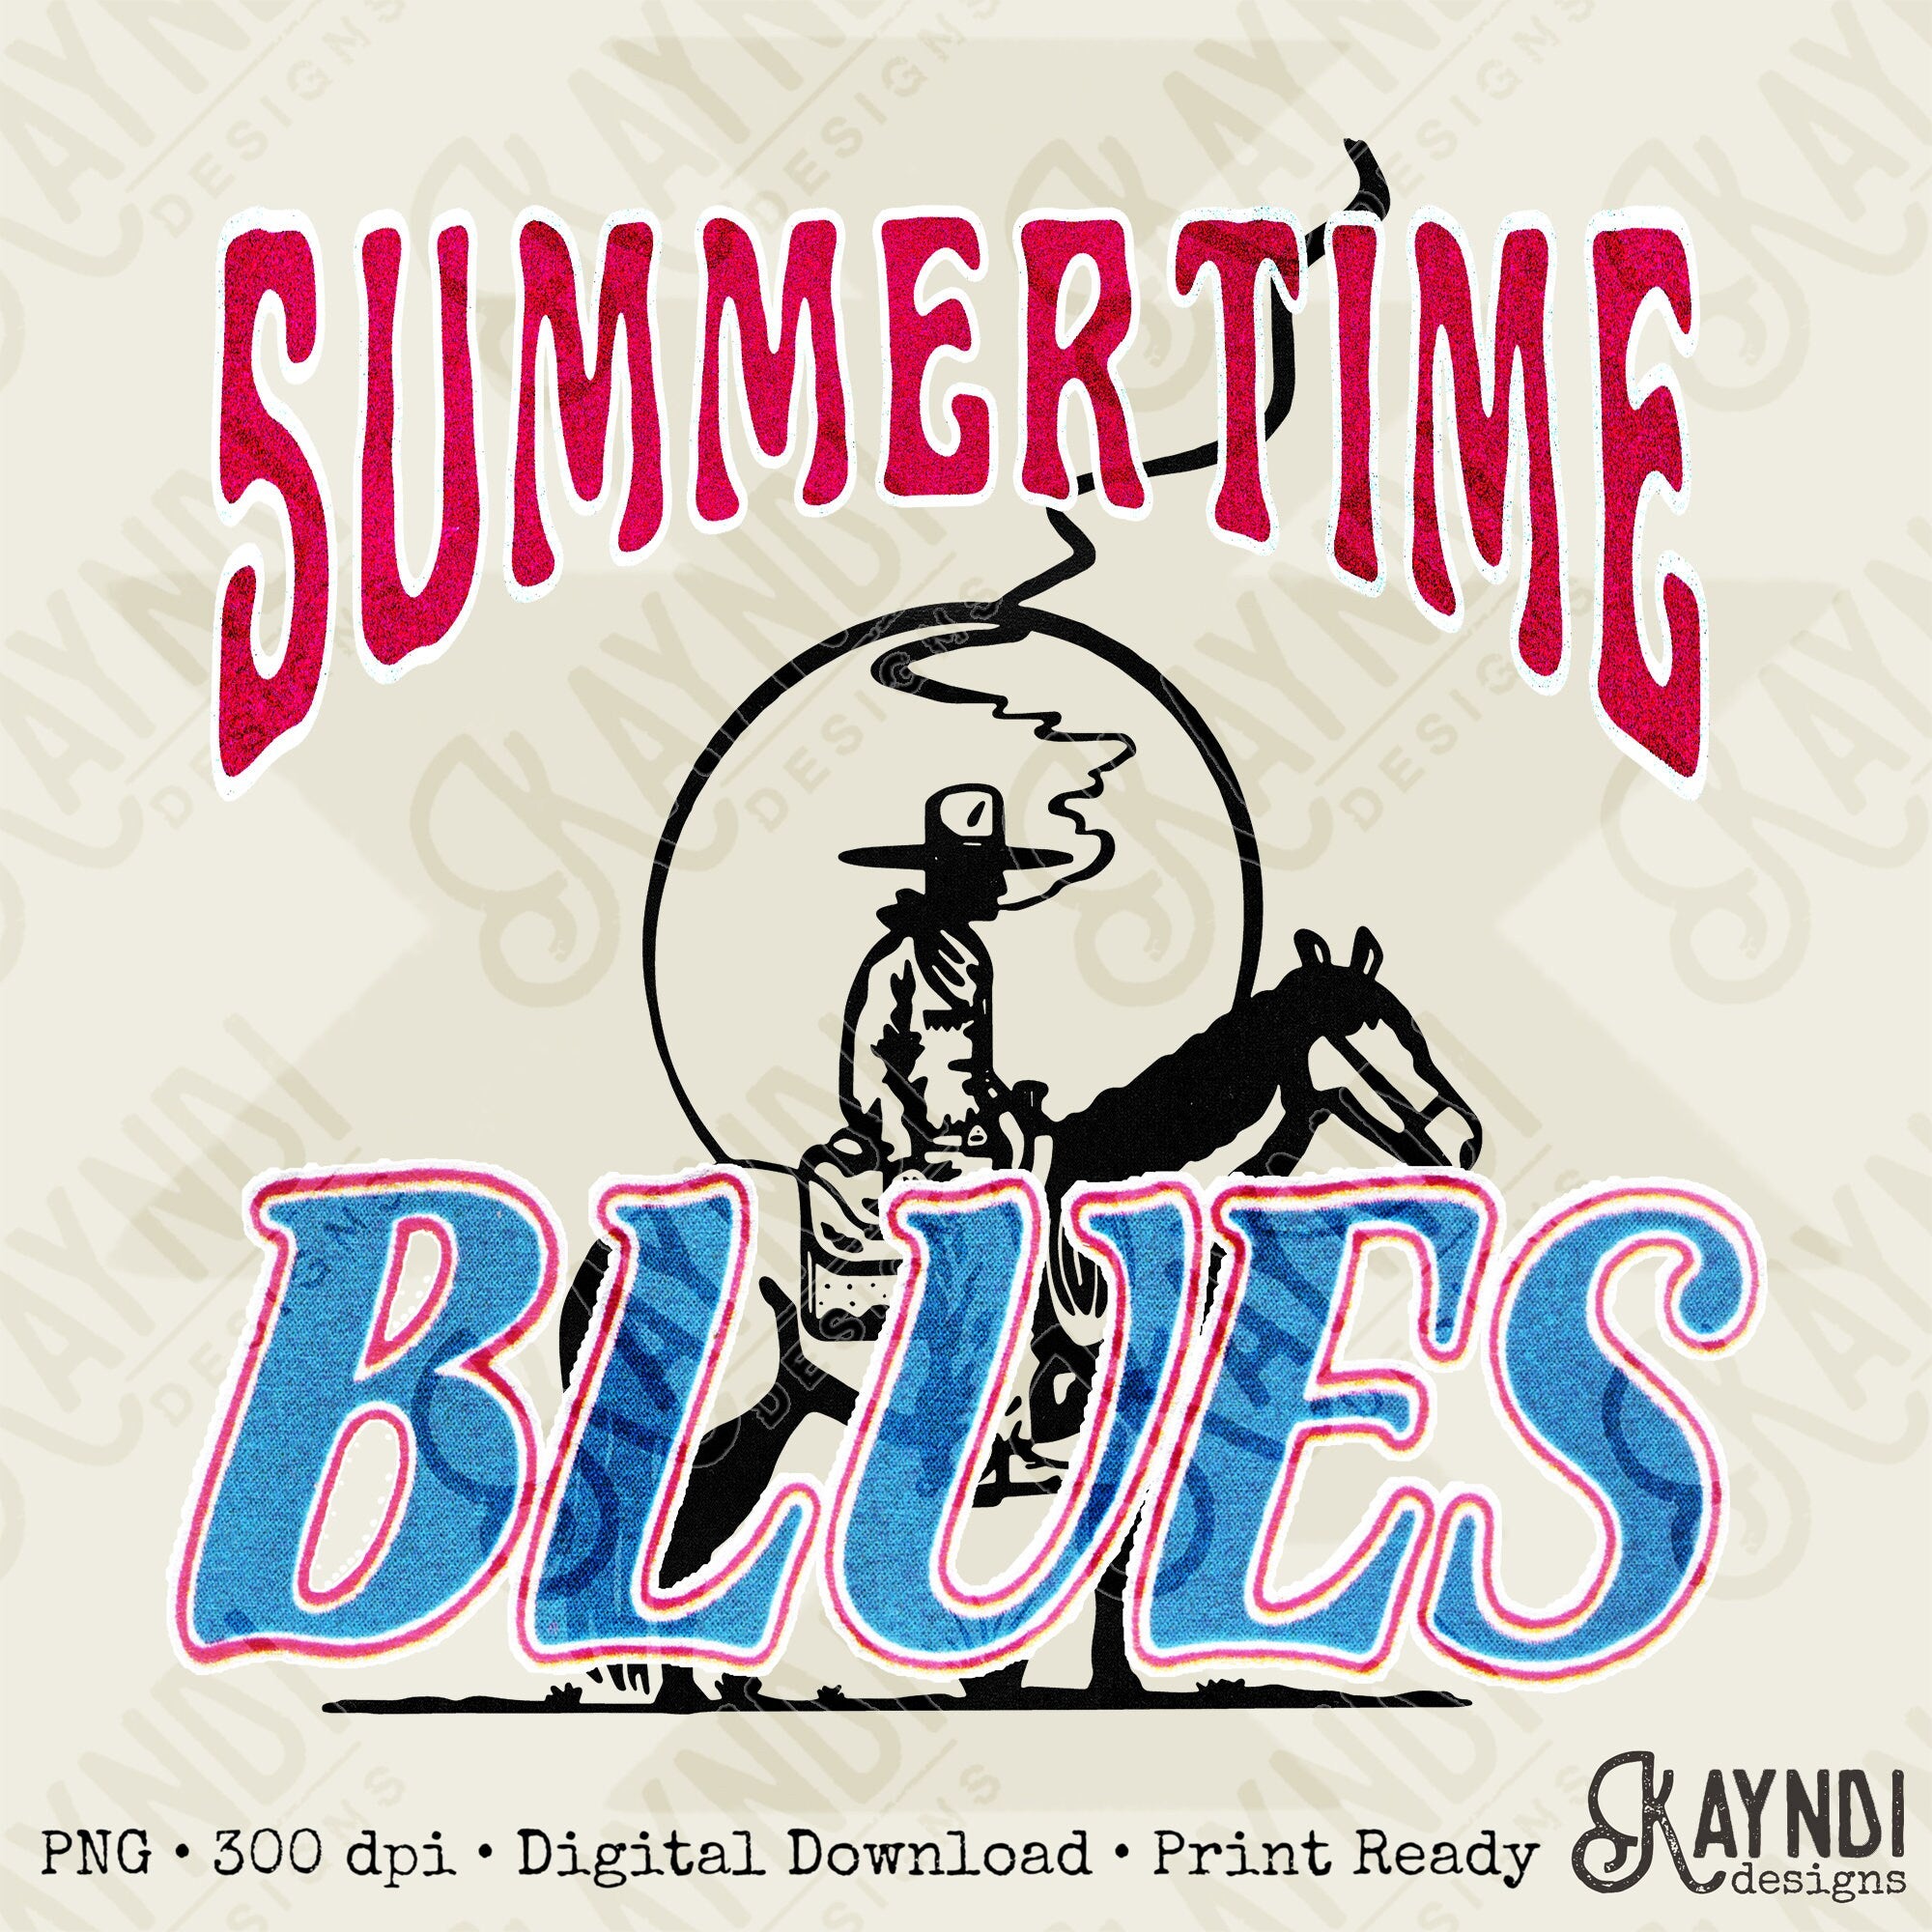 Summertime Blues Sublimation Design PNG Digital Download Printable Western Desert Cowboy Smoking Country Rodeo Blue Collar Southern